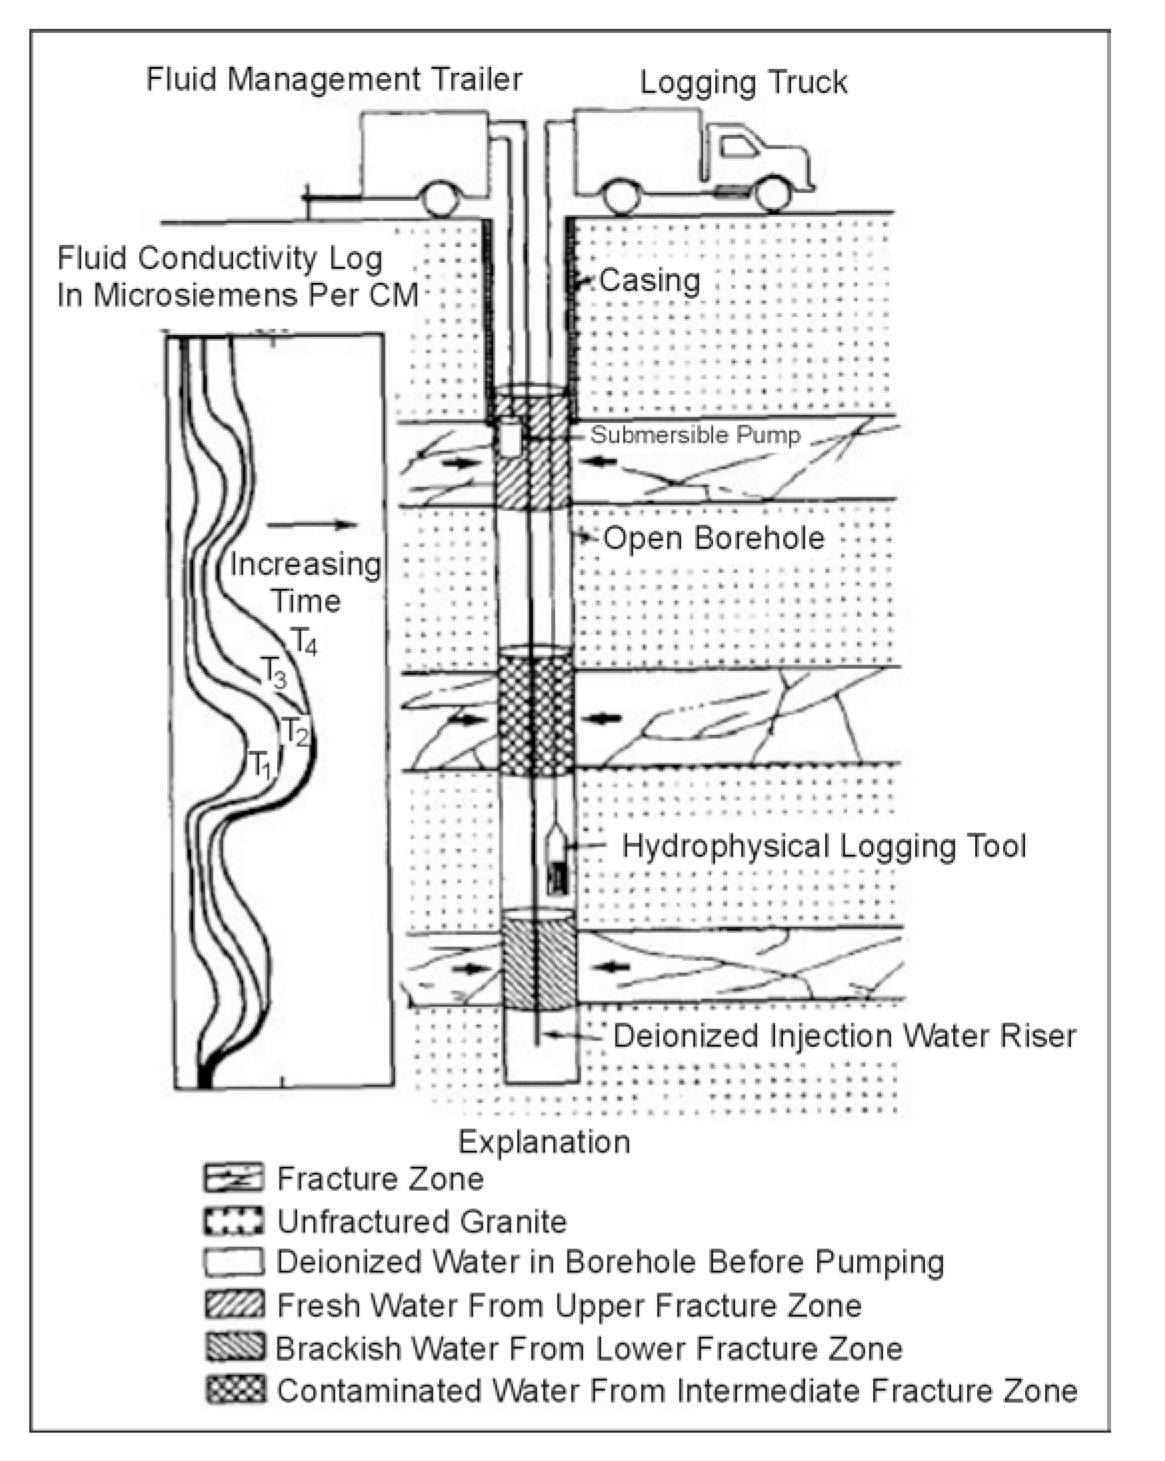 Schematic drawing of equipment used for hydrophysical logging after injection of deionized water; and time series of fluid conductivity logs, (Vernon, et al., 1993; copyright permission granted by Colog, Inc.)